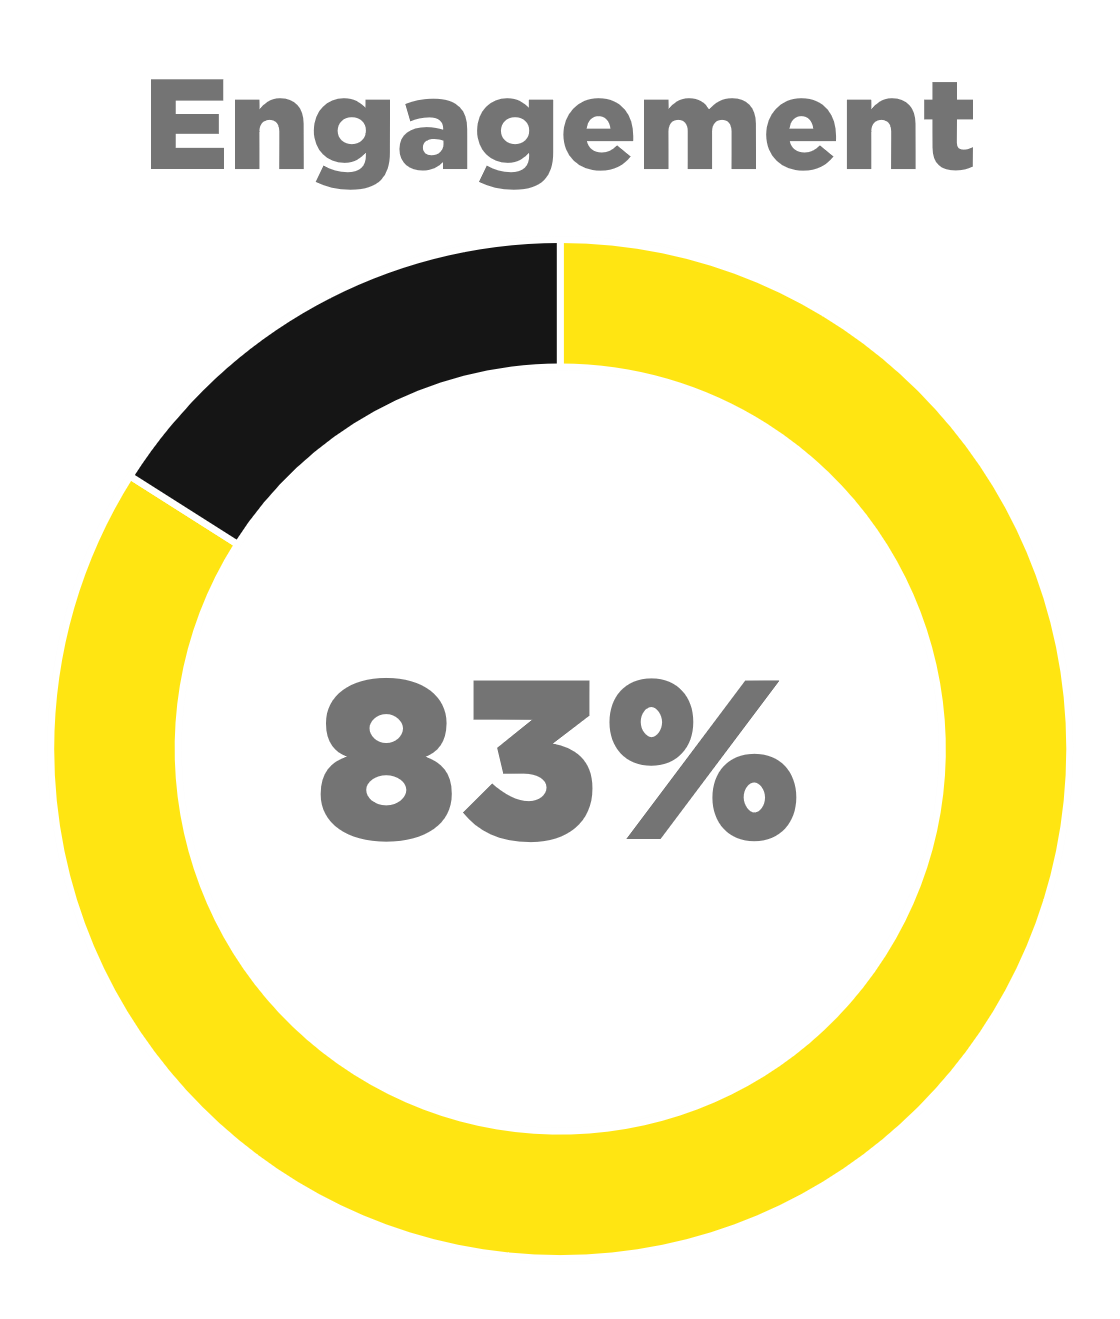 Text reads: "Engagement 83%" with a pie chart representing the statement